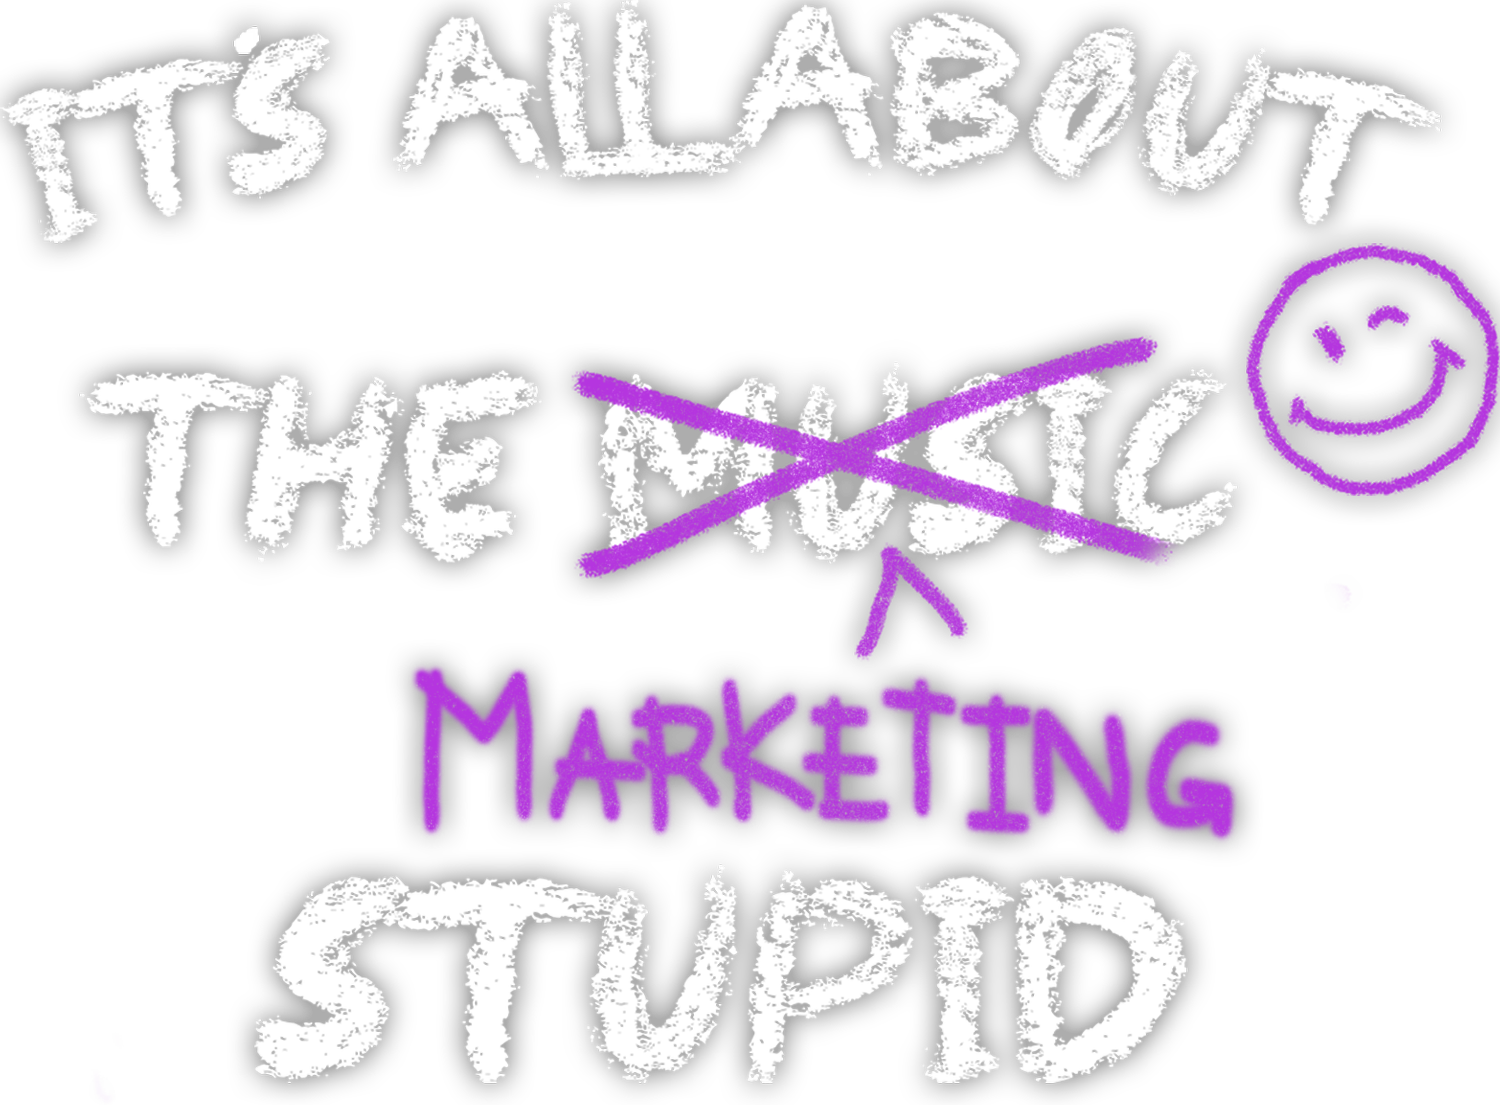 IT’S ALL ABOUT THE MUSIC MARKETING STUPID